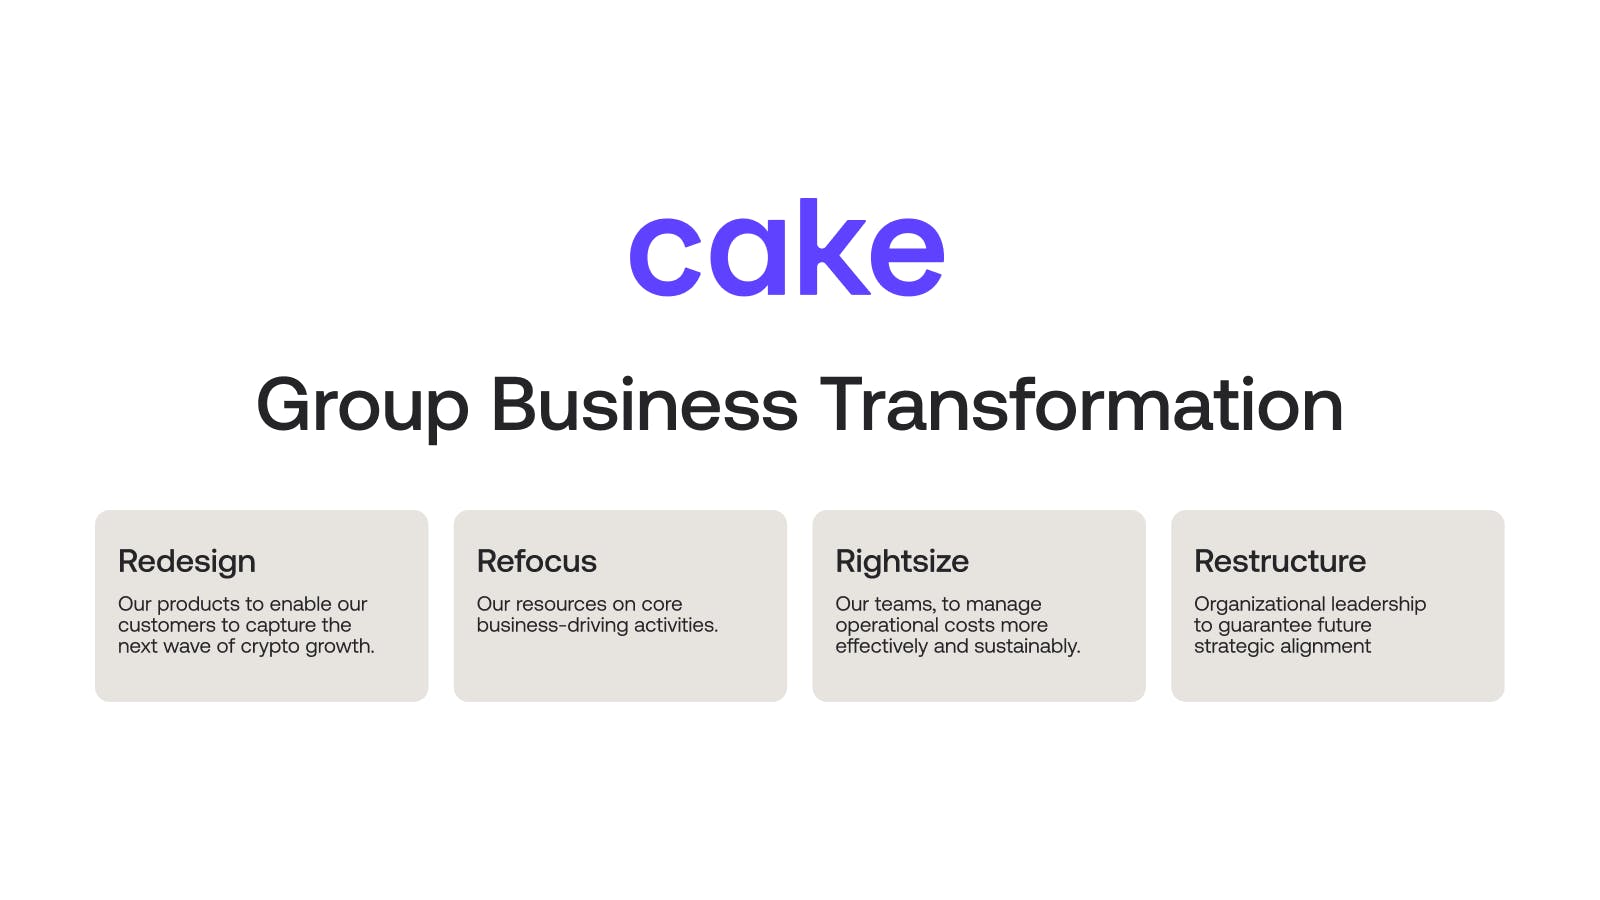 Cake Group Business Transformation